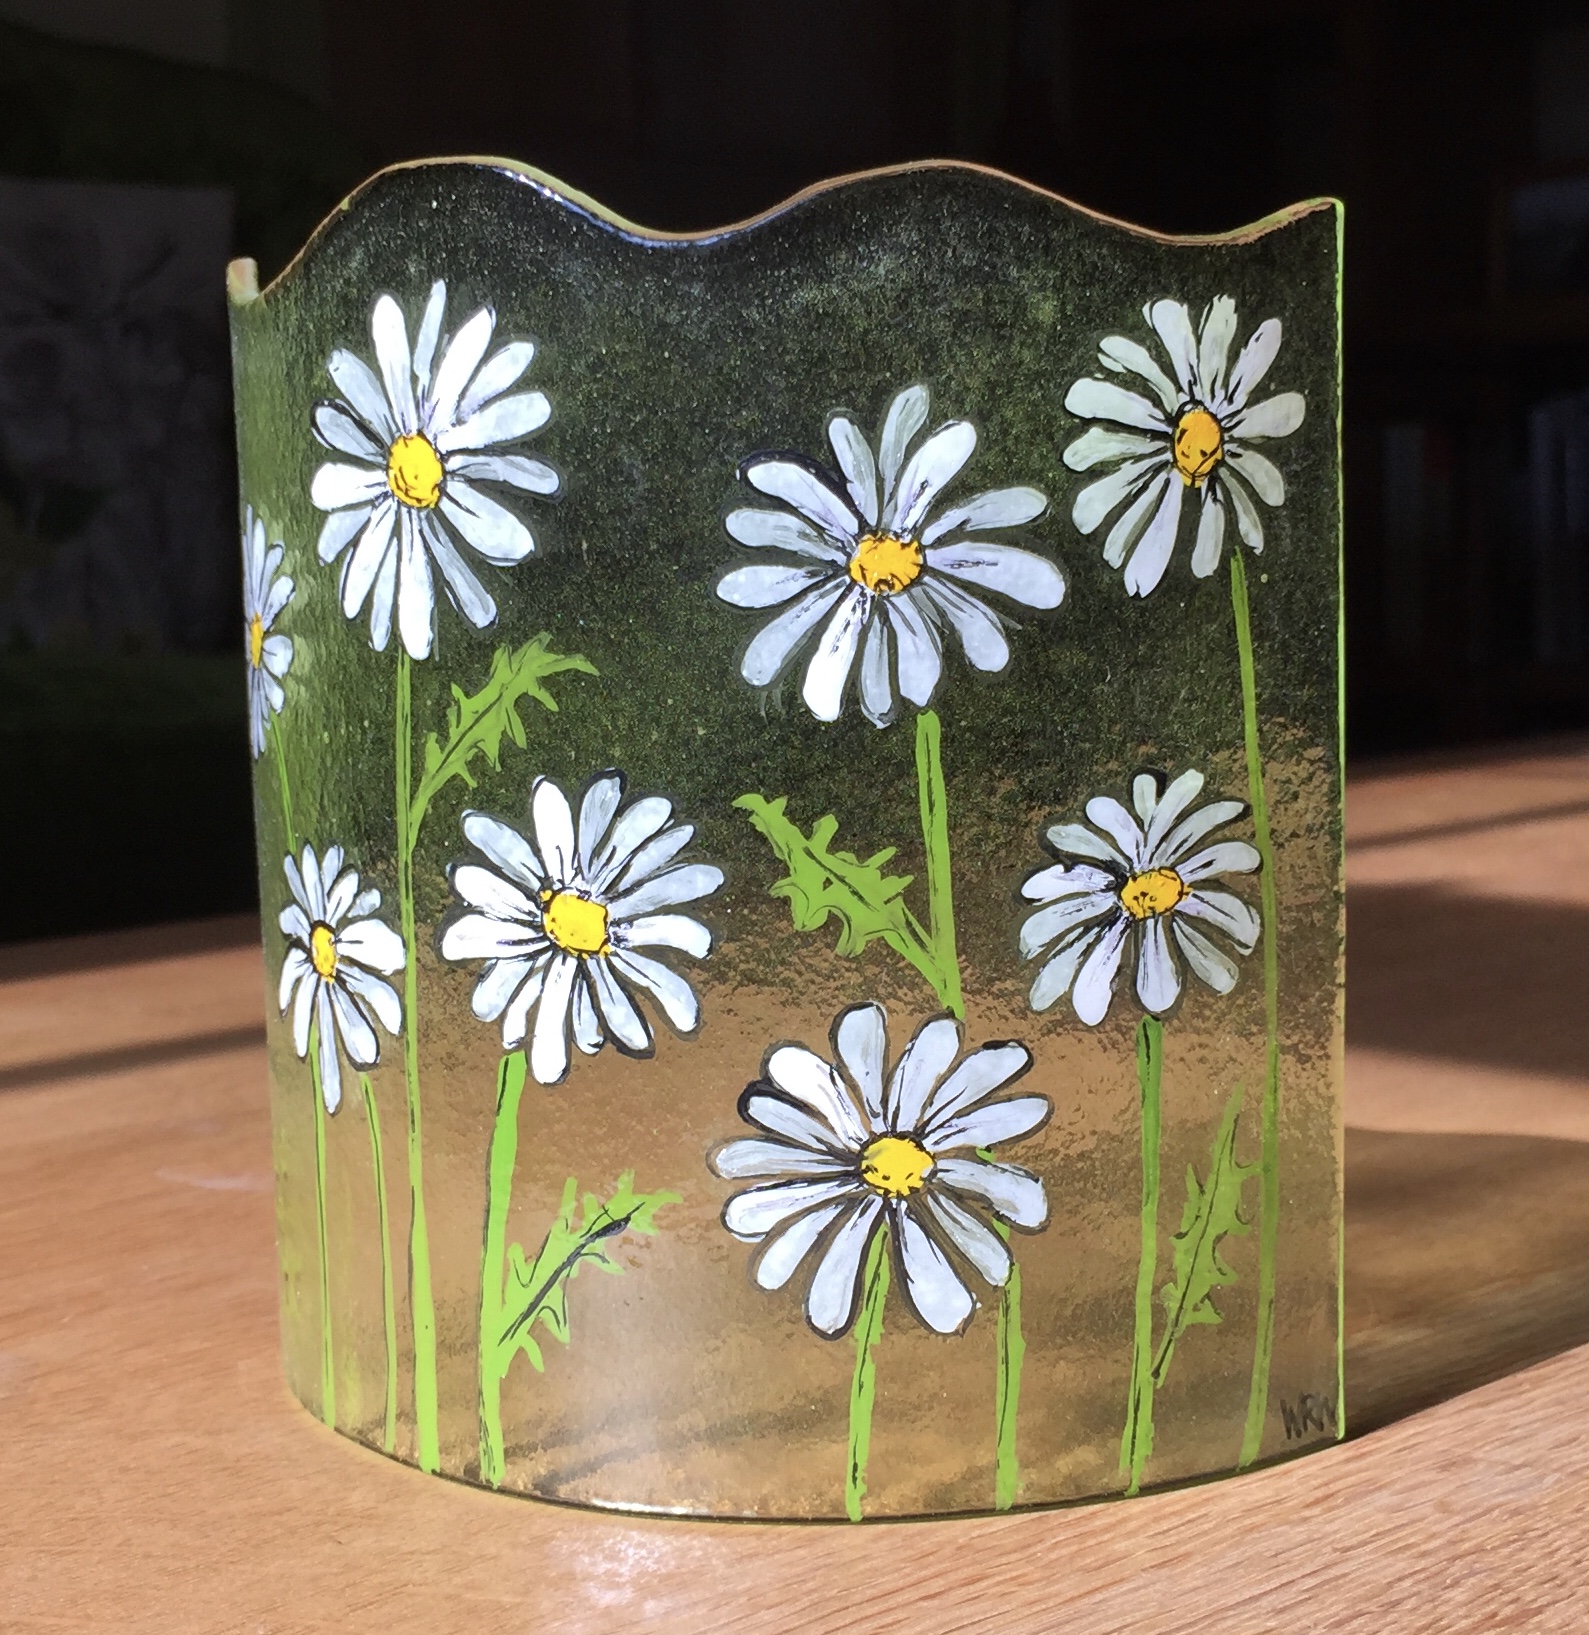 Curved fused glass panel with hand painted daisies